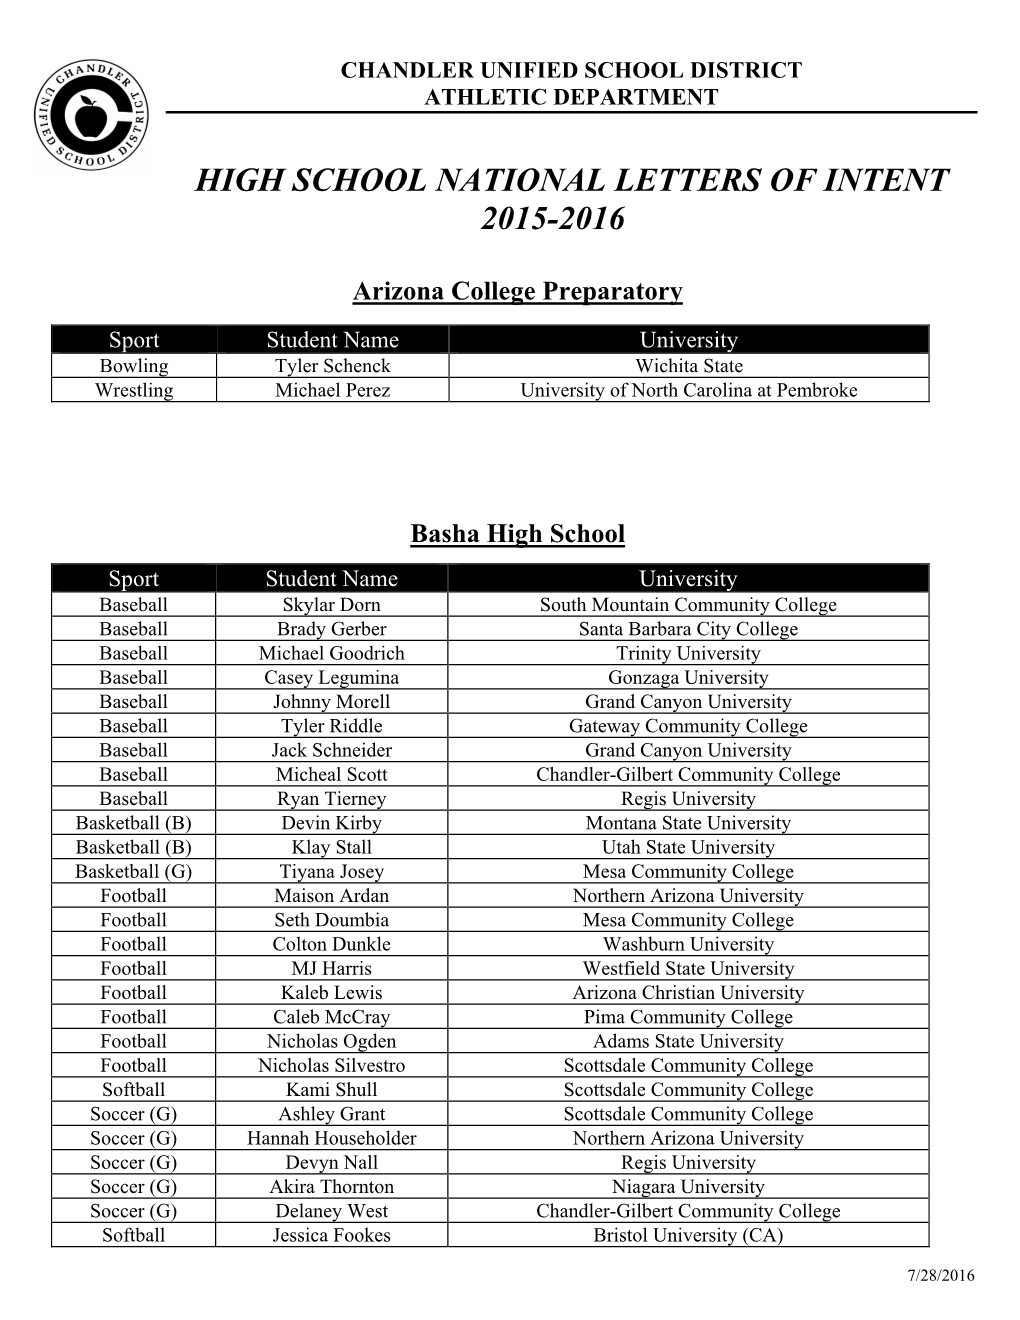 High School National Letters of Intent 2015-2016